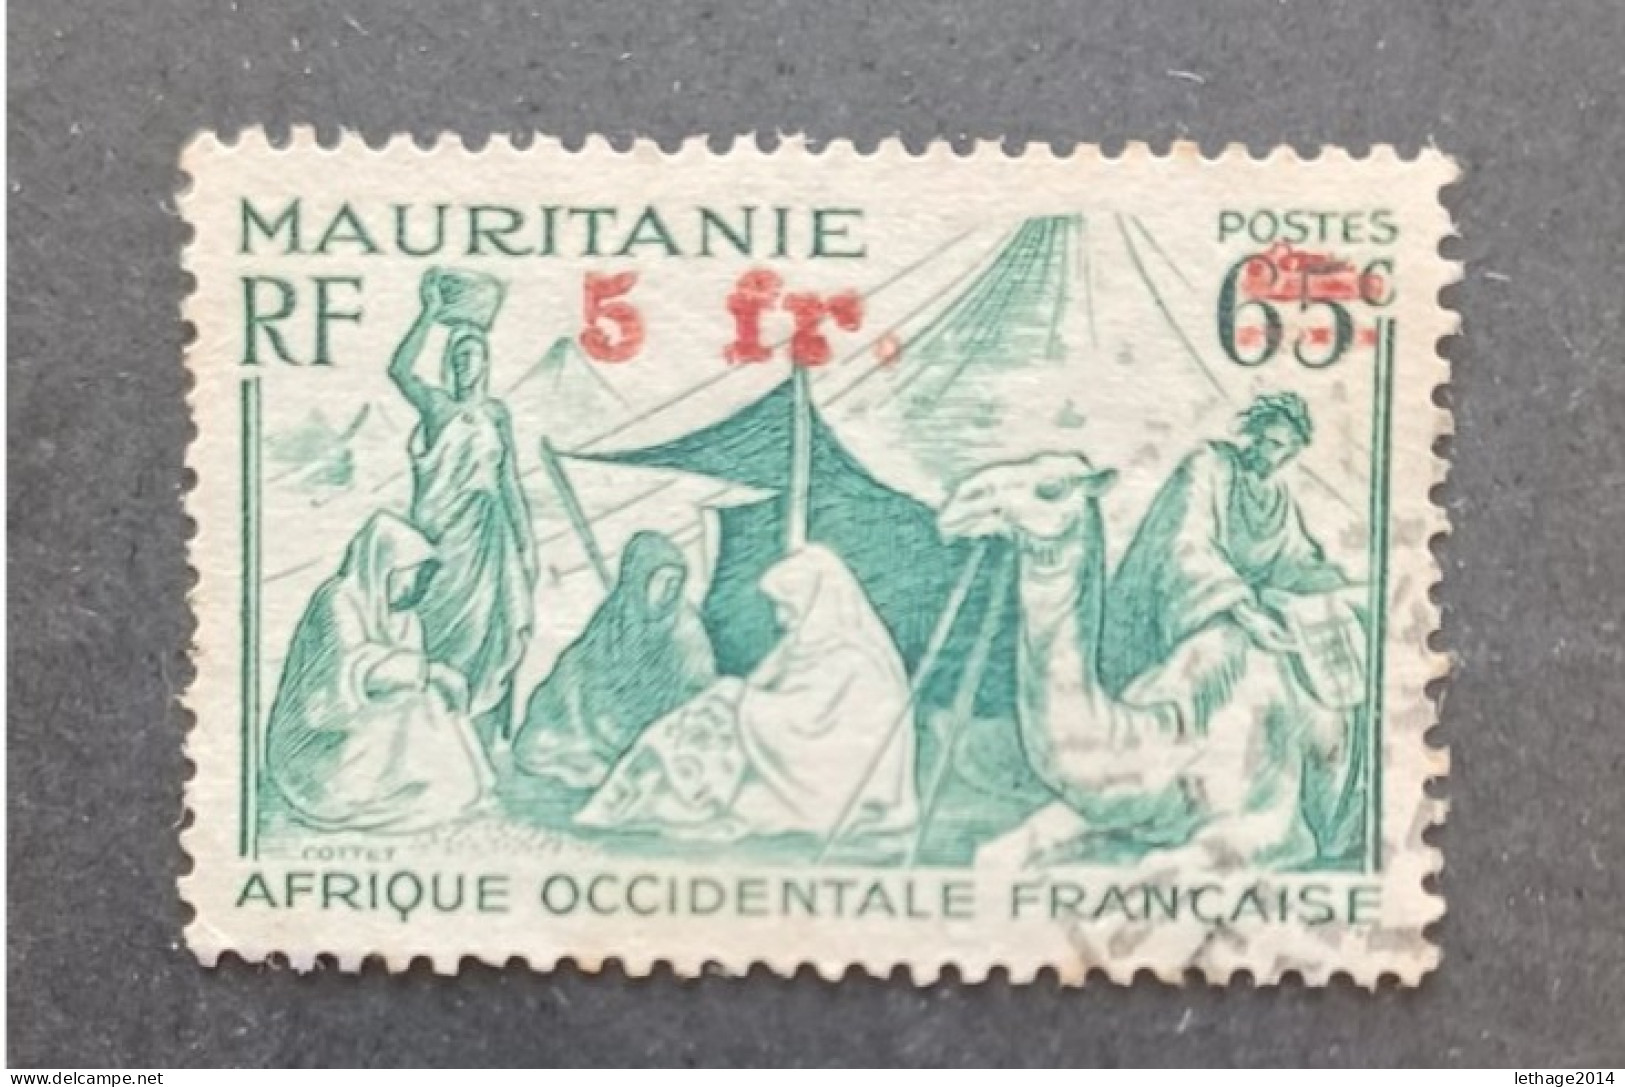 COLONIE FRANCE MAURITANIE 1944 NOMADES CAT YVERT N 135 VARIETY OVERPRINT TRIPLE STRETCH TO THE RIGHT - Usati